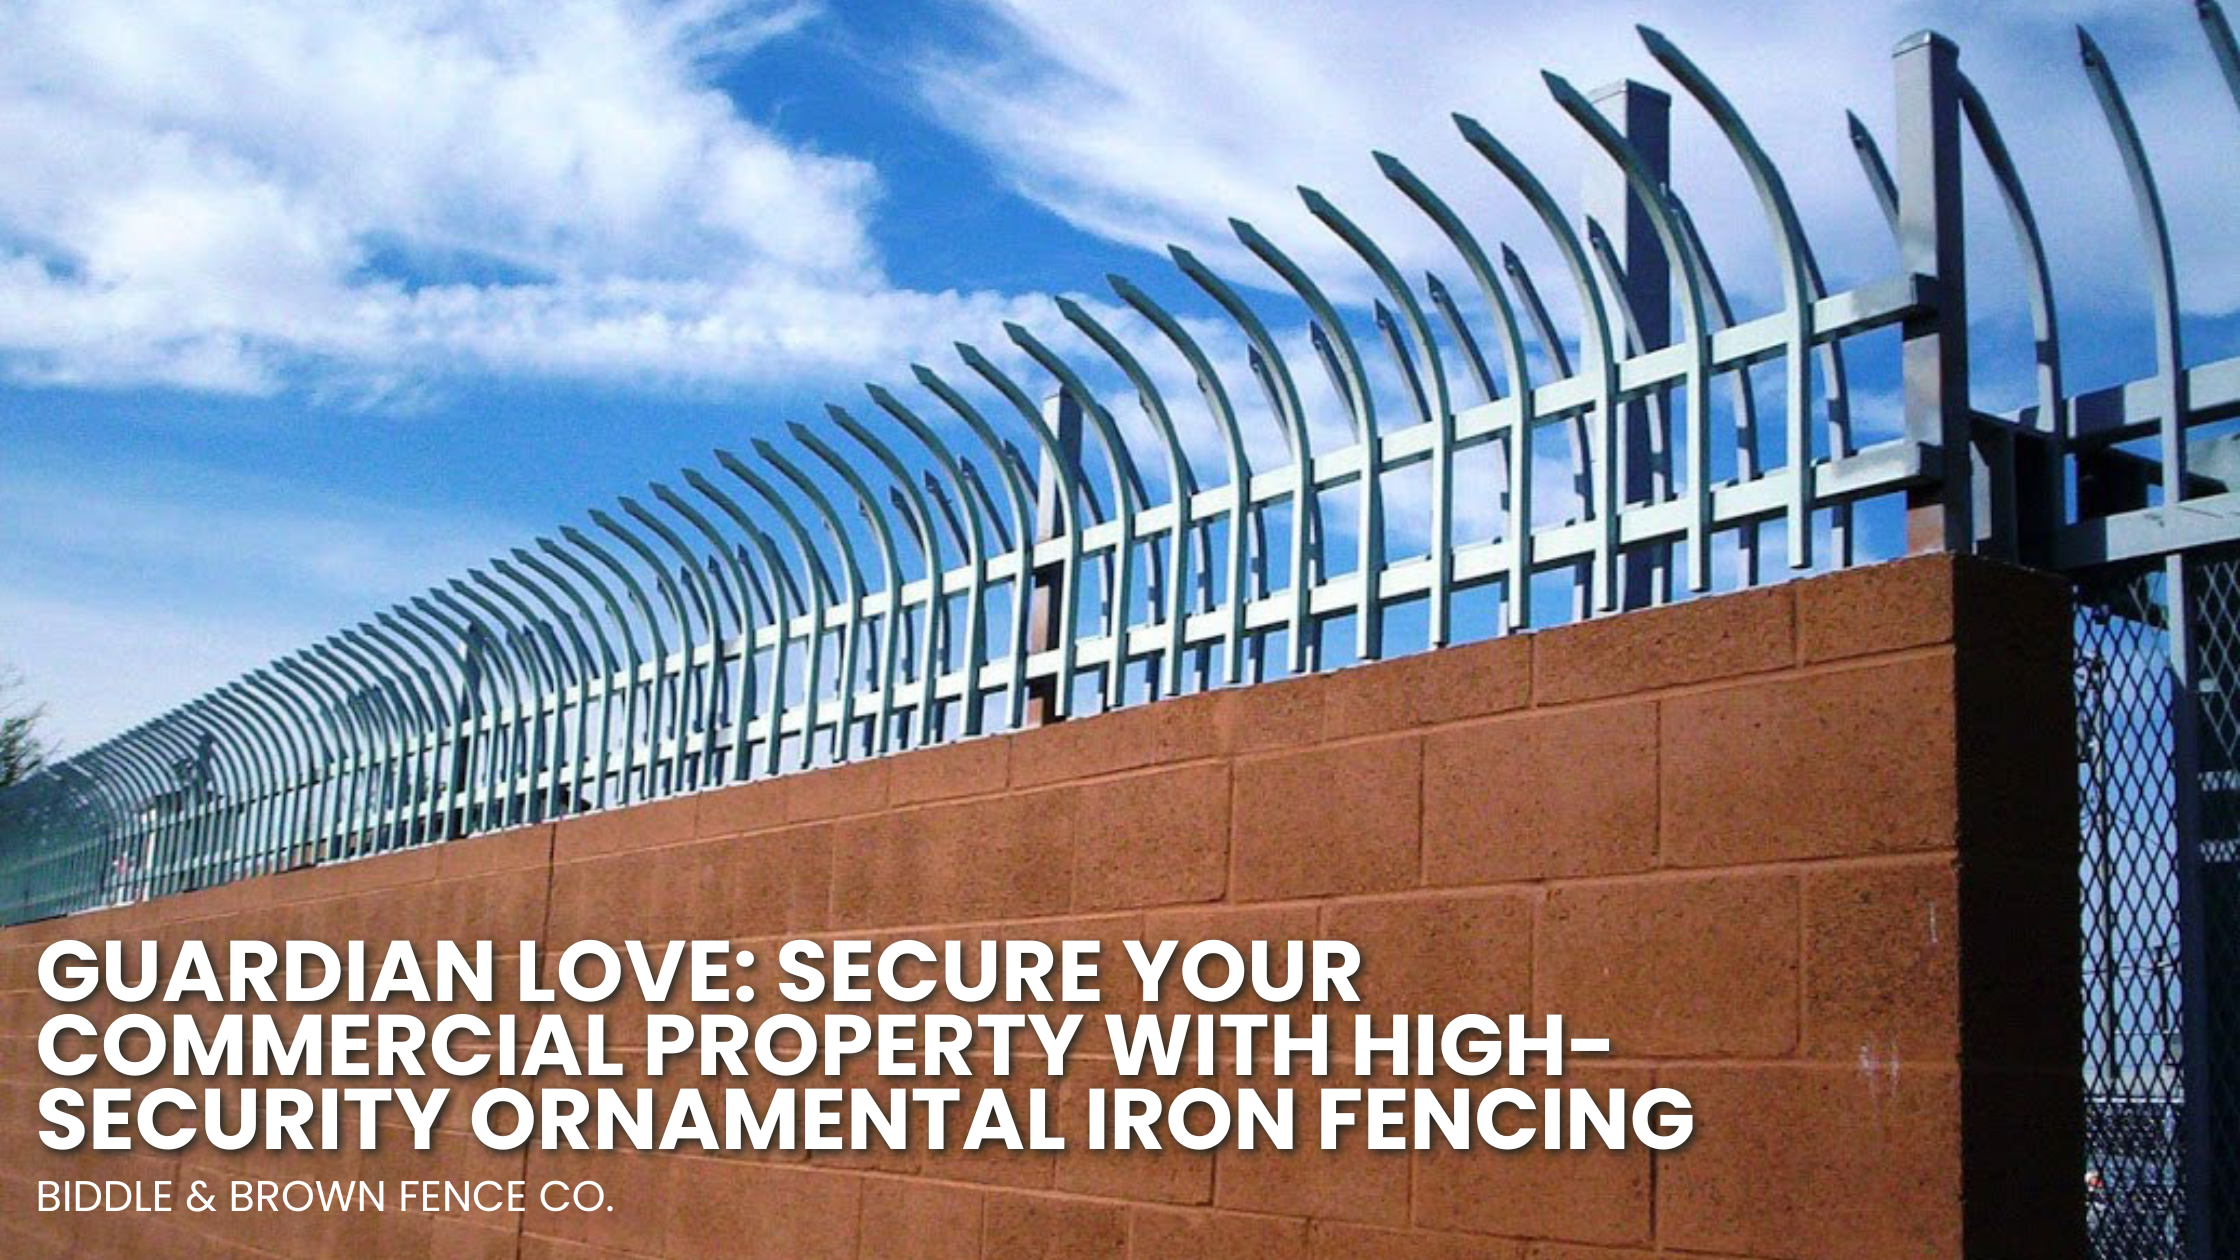 Guardian Love: Secure Your Commercial Property with High-Security Ornamental Iron Fencing